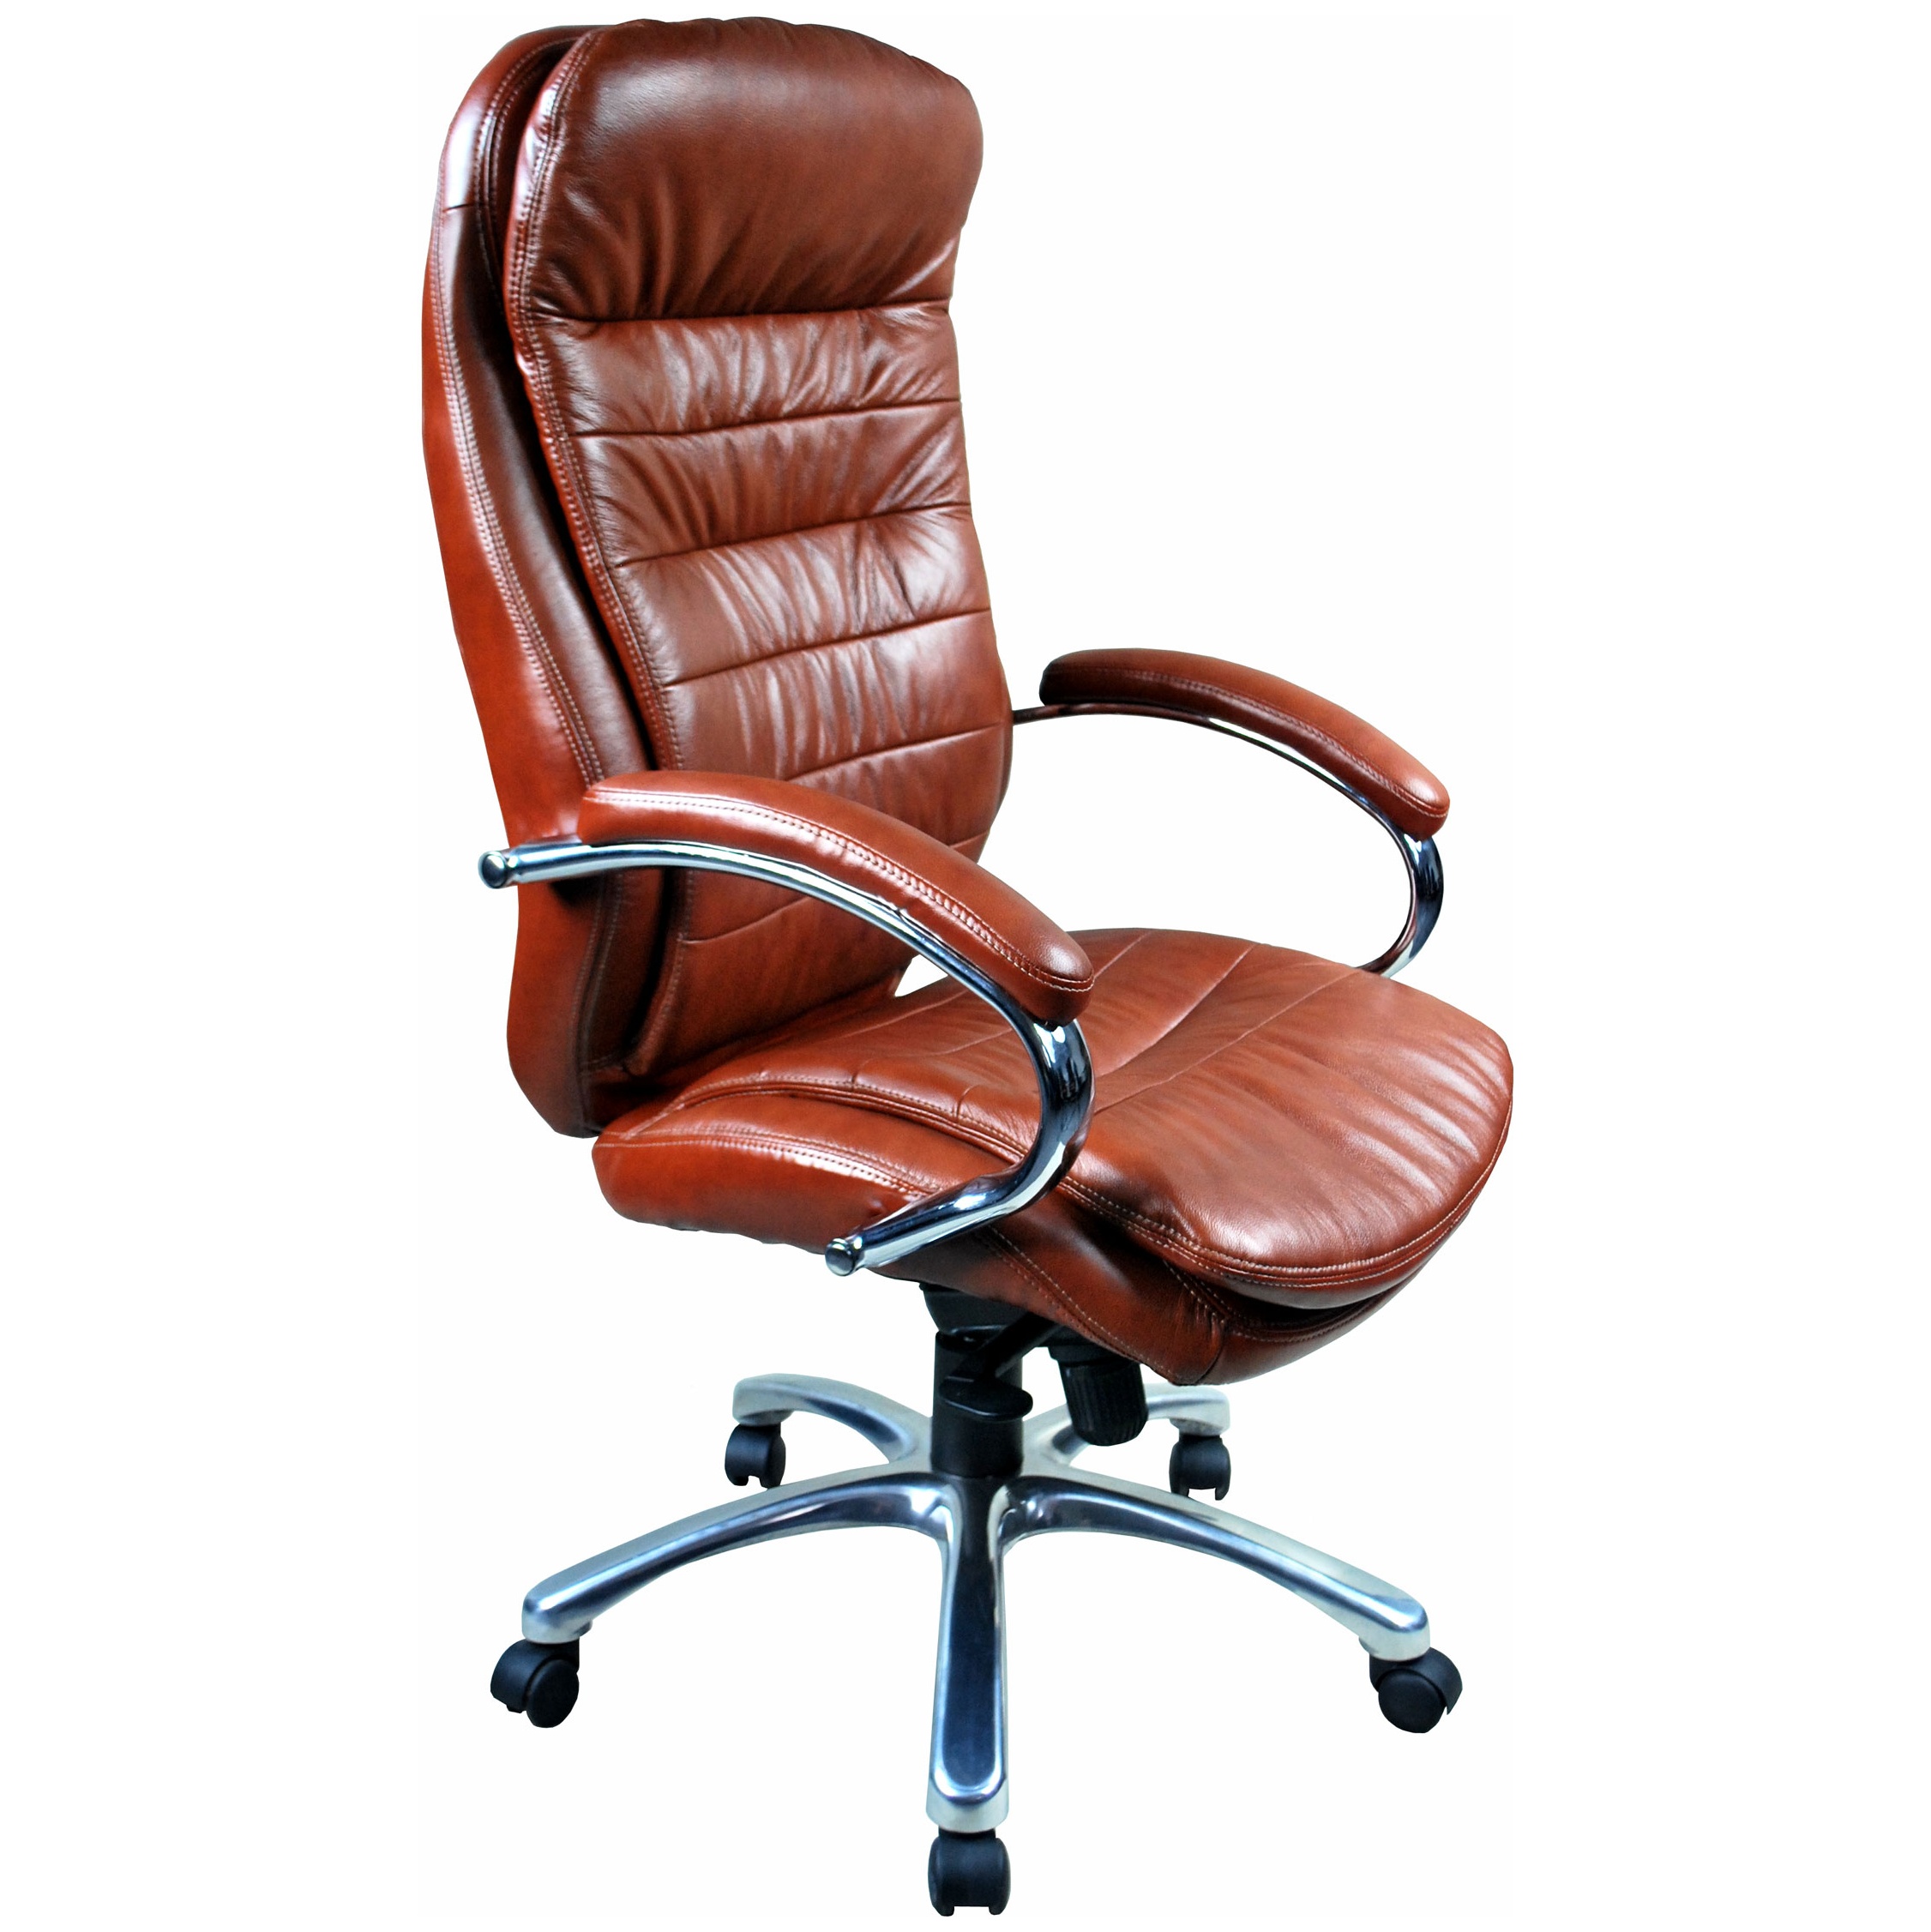 Siena Leather Executive Office Chairs | Executive Office Chairs